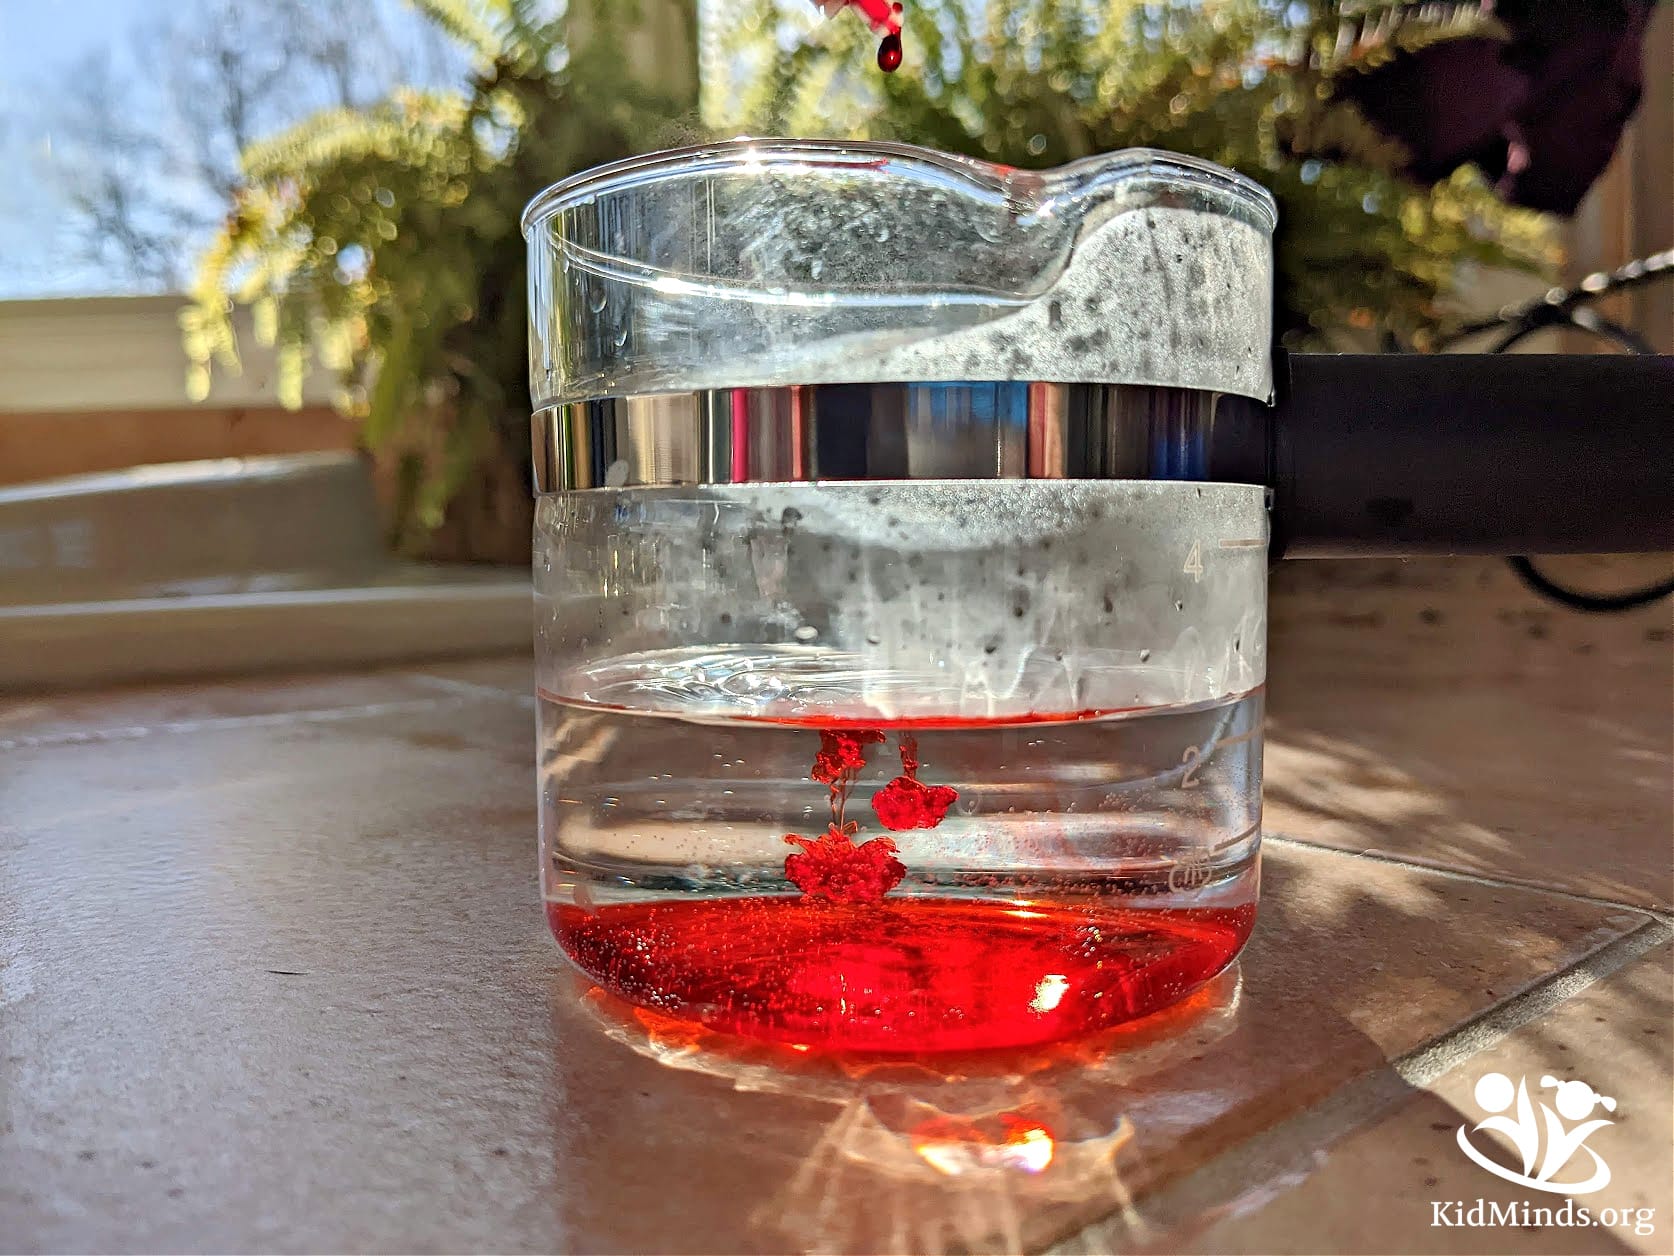 The Icy-Hot Christmas science experiment allows your kids to explore the concepts of hot and cold, water density, thermal energy, and even color mixing.  #kidsactivities #scienceforkids #elementaryeducation #kidminds #handsonlearning #christmasscience